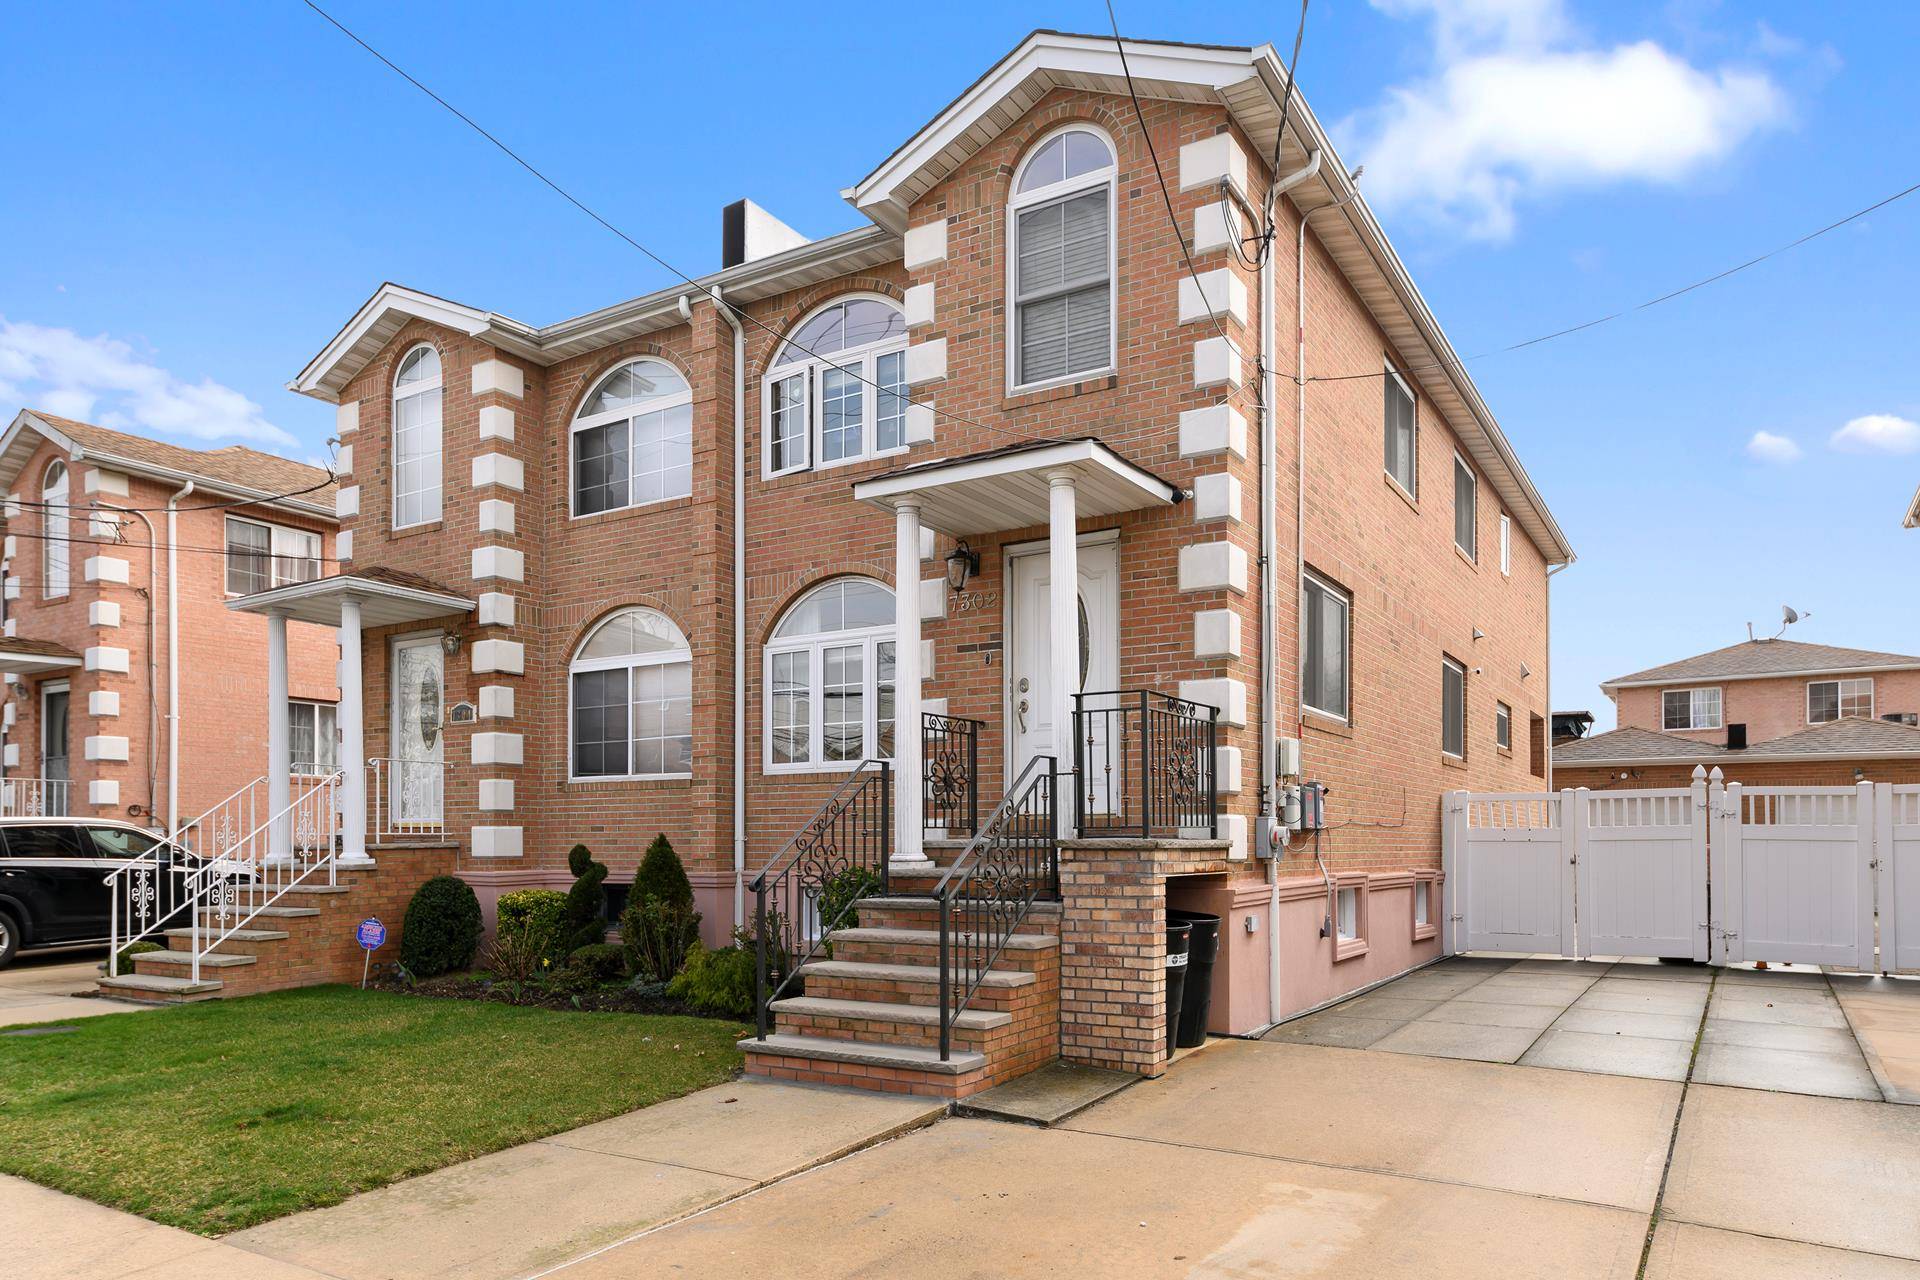 Welcome home to this gorgeously renovated, semi detached brick beauty in prime Bergen Beach !